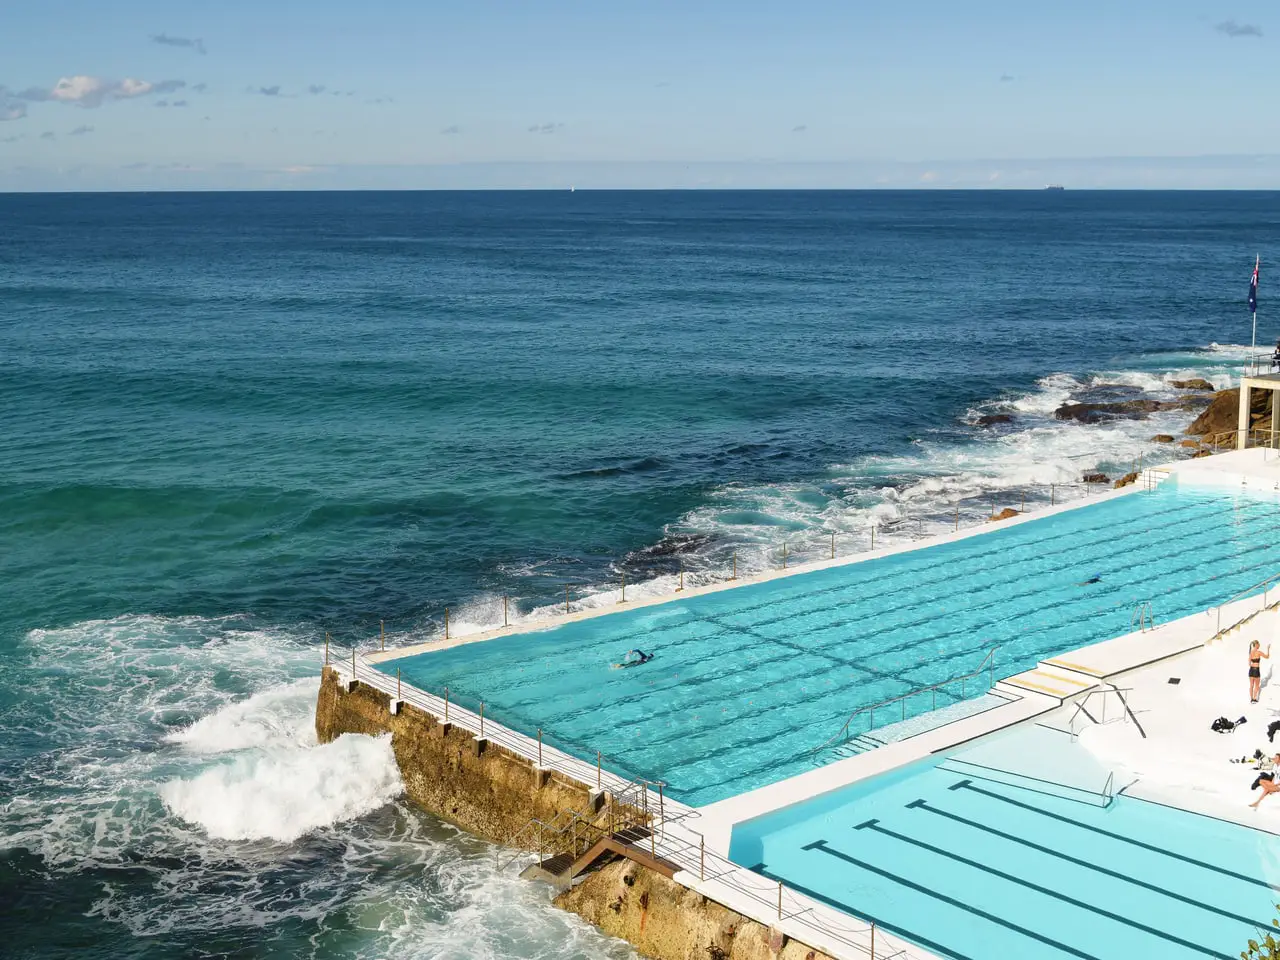 Bondi Icebergs swimming pool in Sydney, Australia, with the ocean in the background